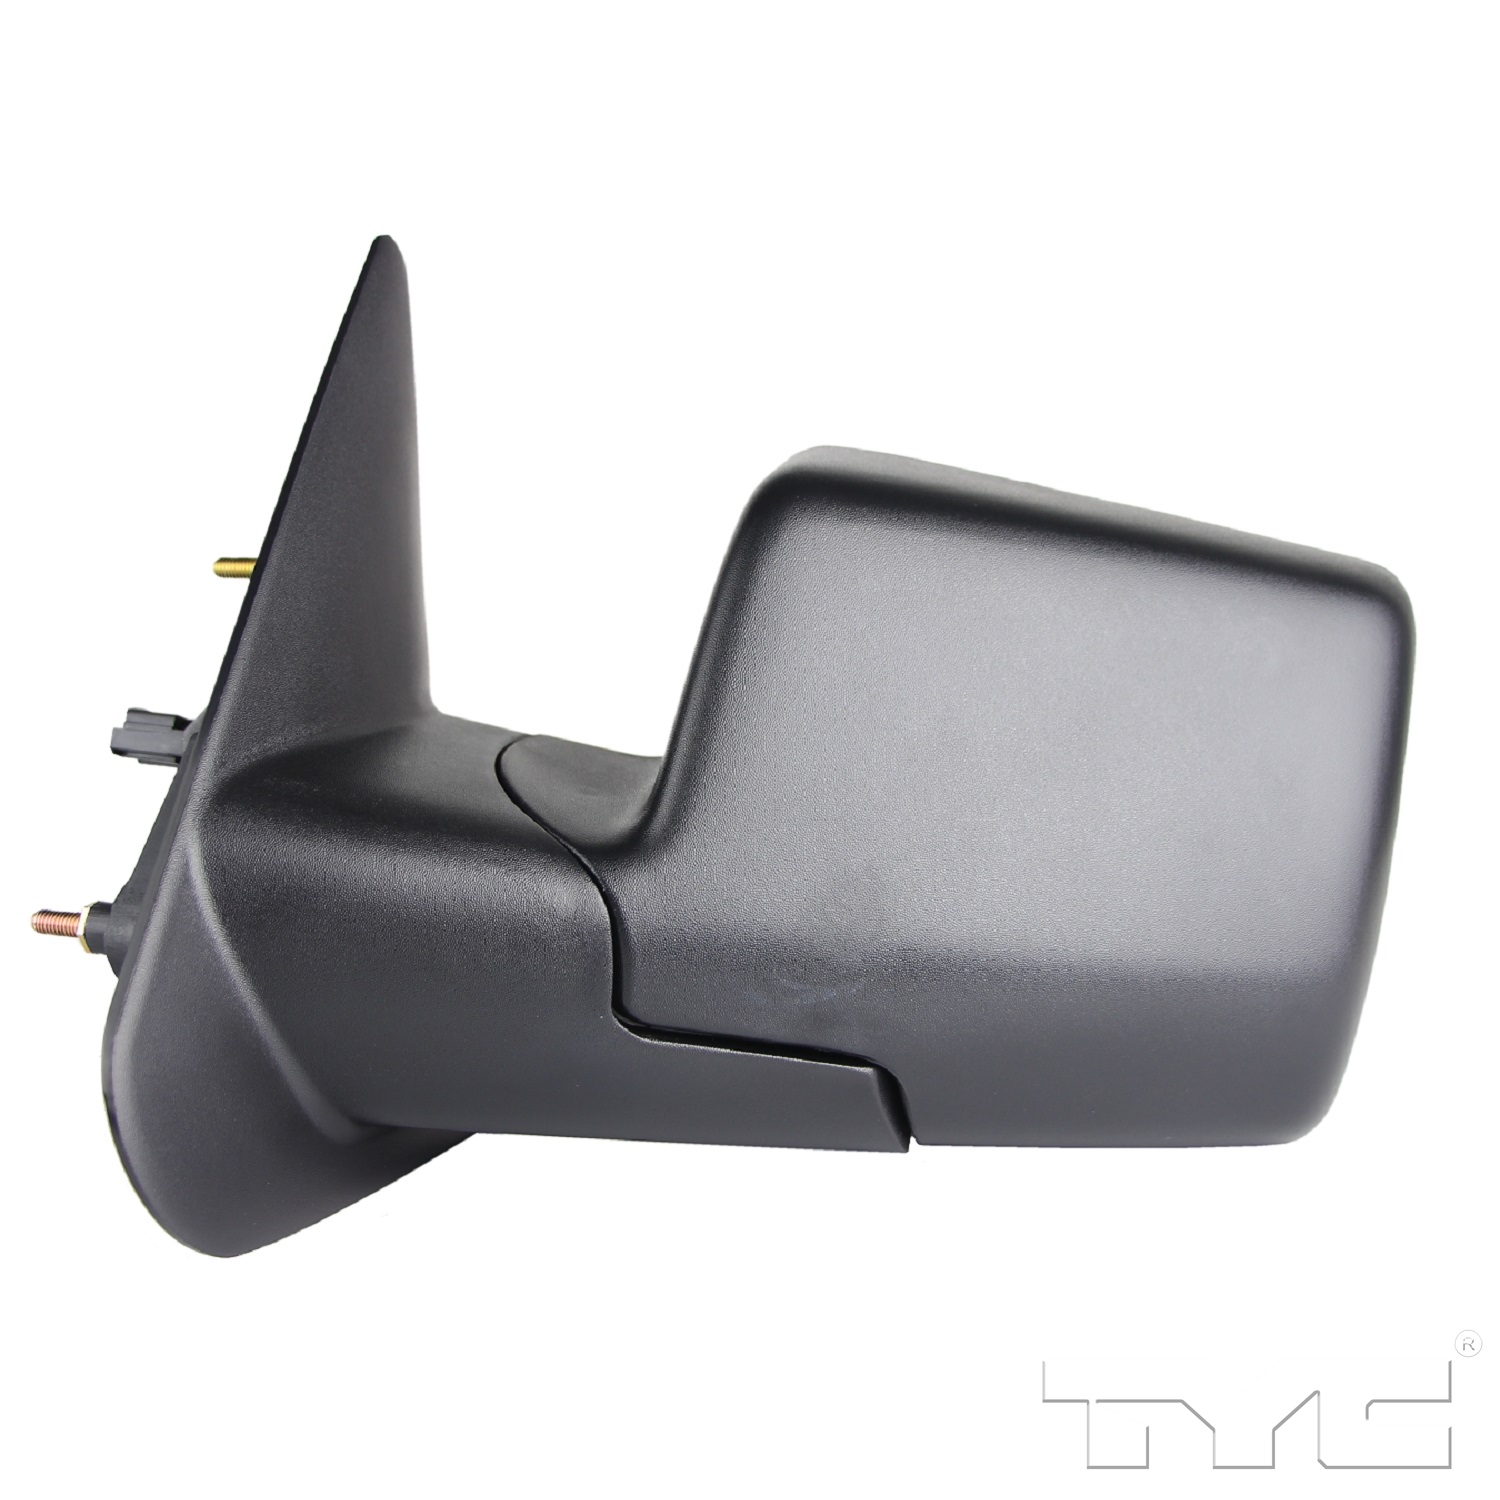 Aftermarket MIRRORS for MAZDA - B3000, B3000,06-07,LT Mirror outside rear view